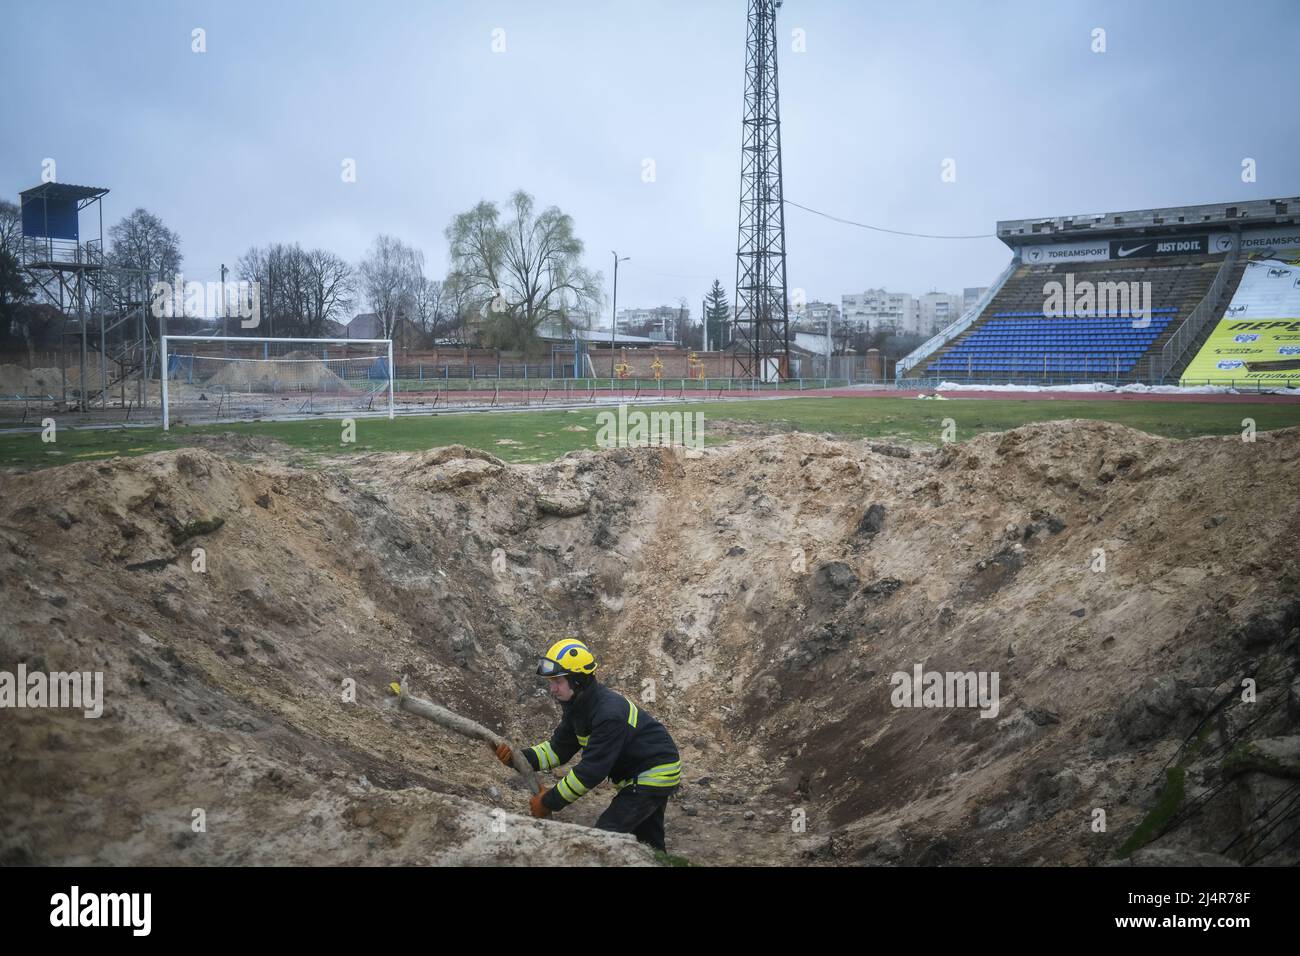 Ukraine. 16th Apr, 2022. A fire fighter inspects a crater in a football pitch at the stadium a residential area of Chernihiv, Ukraine damaged by shelling during the Russian invasion on April 16, 2022. Russian military forces entered Ukraine territory on Feb. 24, 2022. (Photo by Piero Cruciatti/Sipa USA) Credit: Sipa USA/Alamy Live News Stock Photo